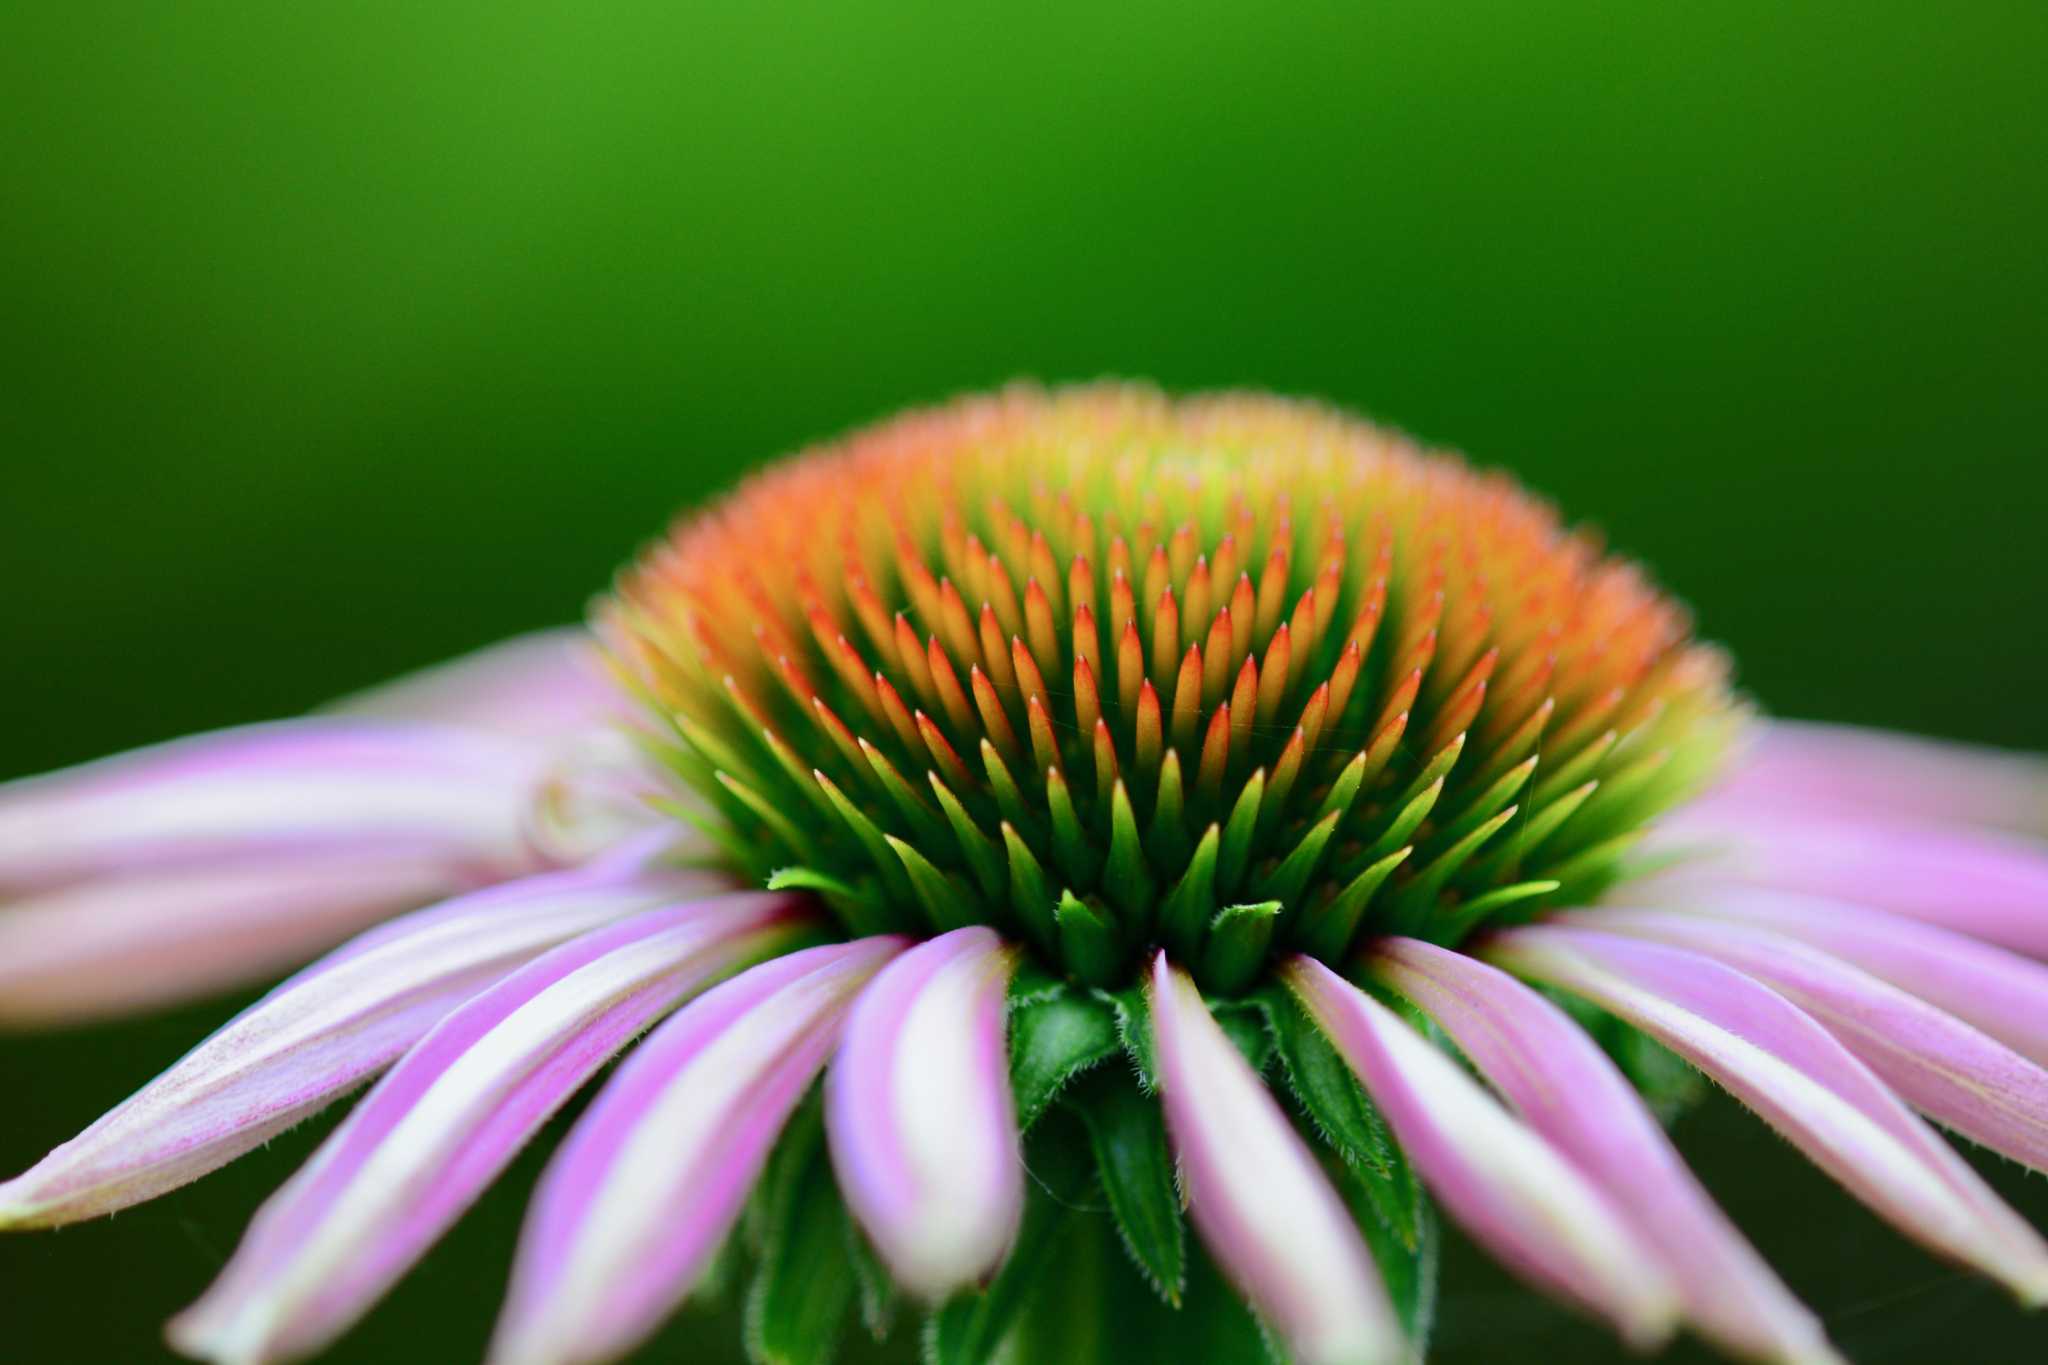 How to Harvest Echinacea for Tea